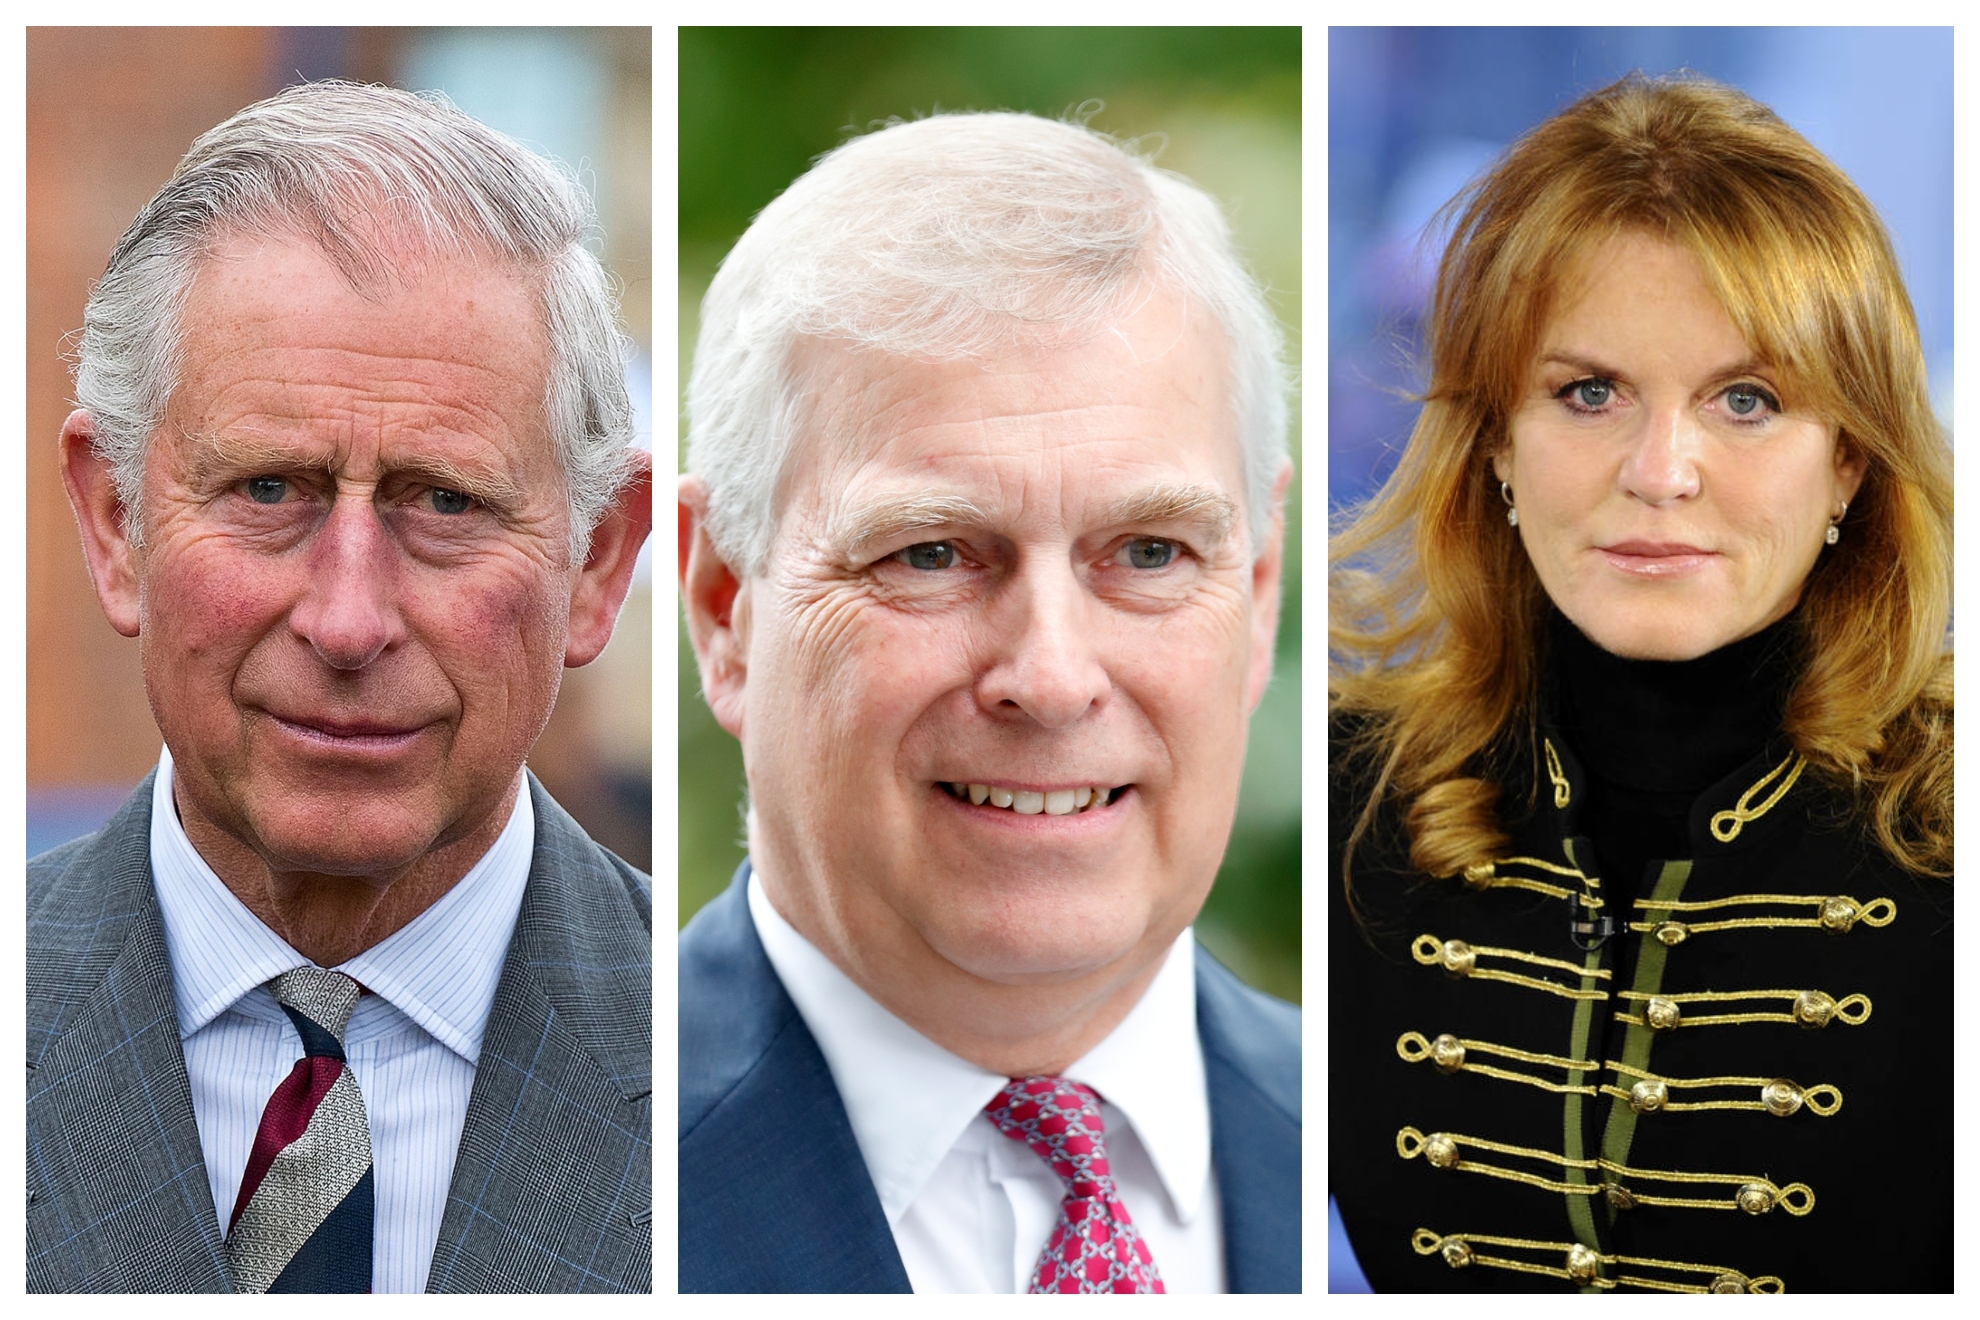 Sarah Ferguson publicly defends Prince Andrew coronation invite snub: Hes such a kind good man